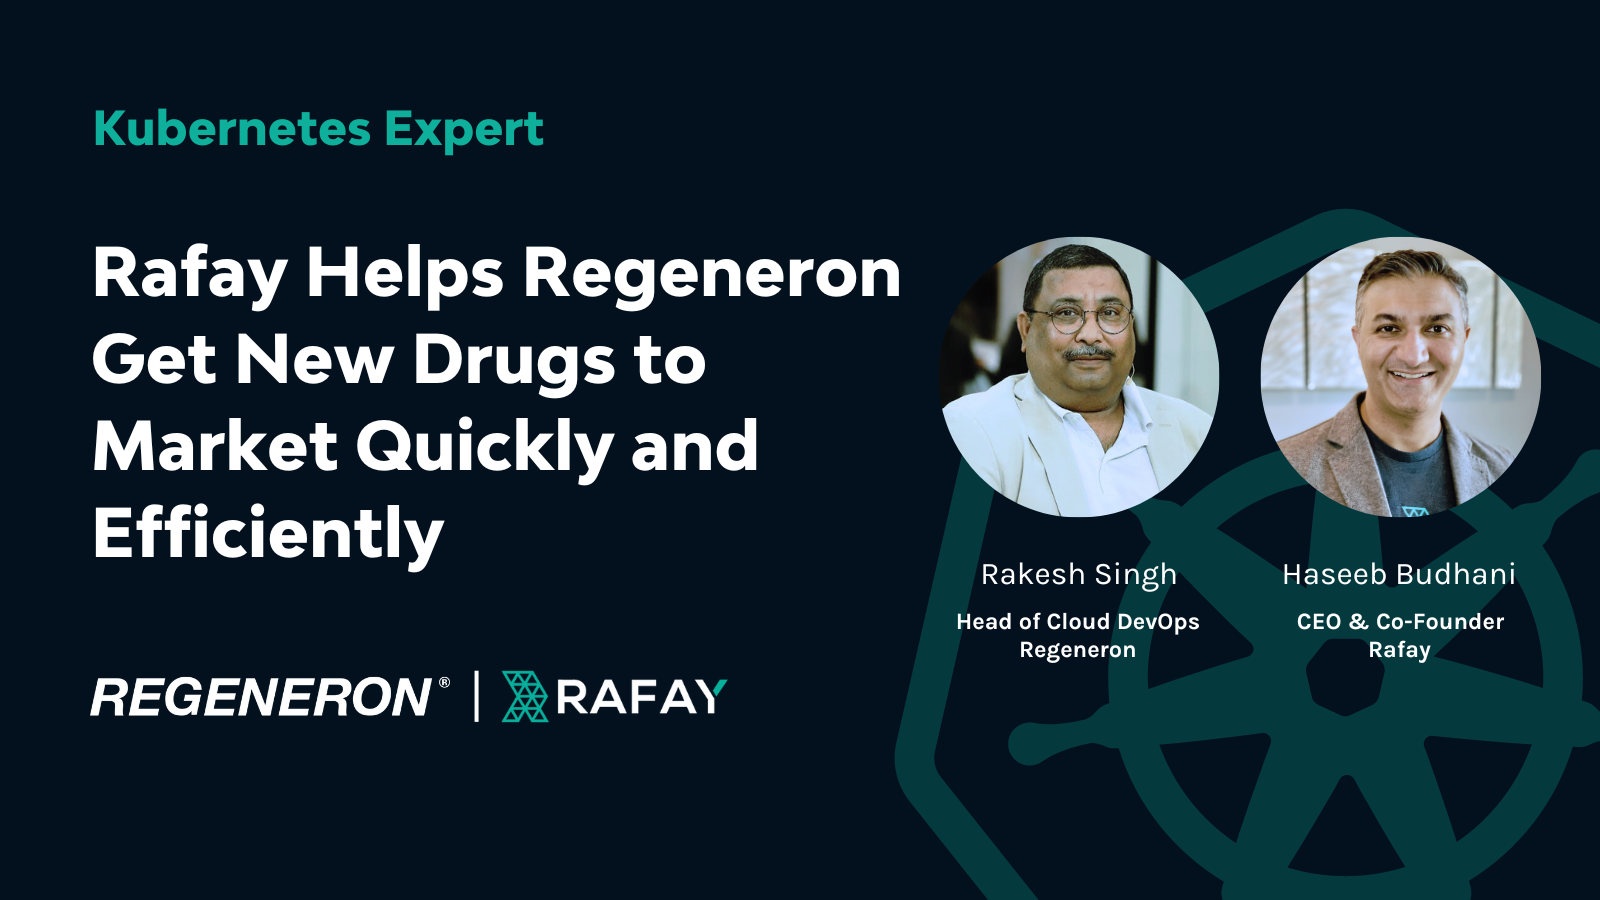 Image for Rafay Helps Regeneron Get New Drugs to Market Quickly and Efficiently